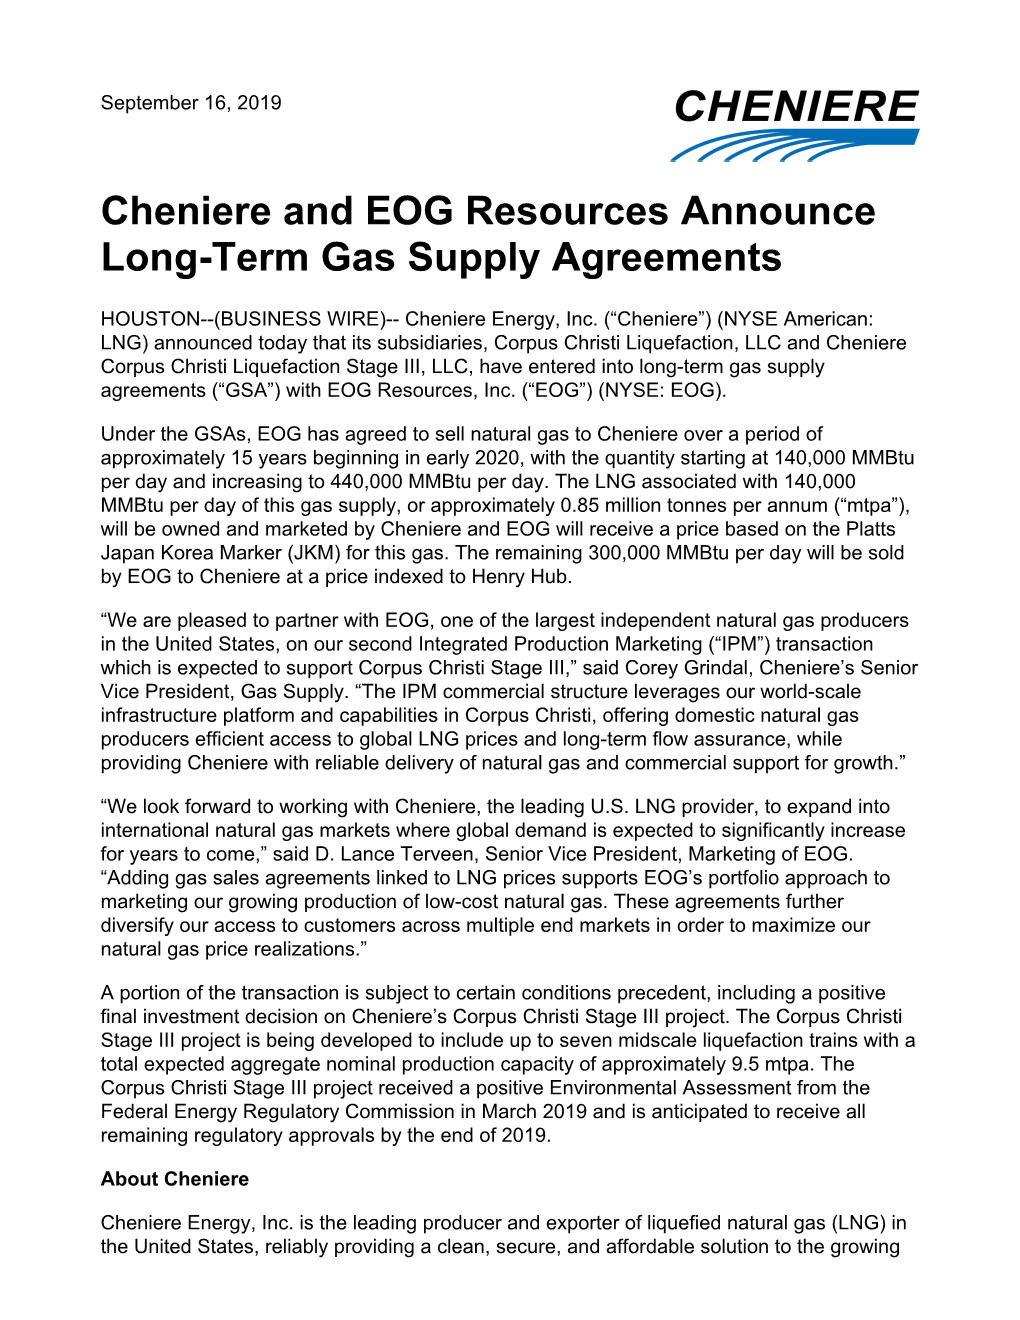 Cheniere and EOG Resources Announce Long-Term Gas Supply Agreements